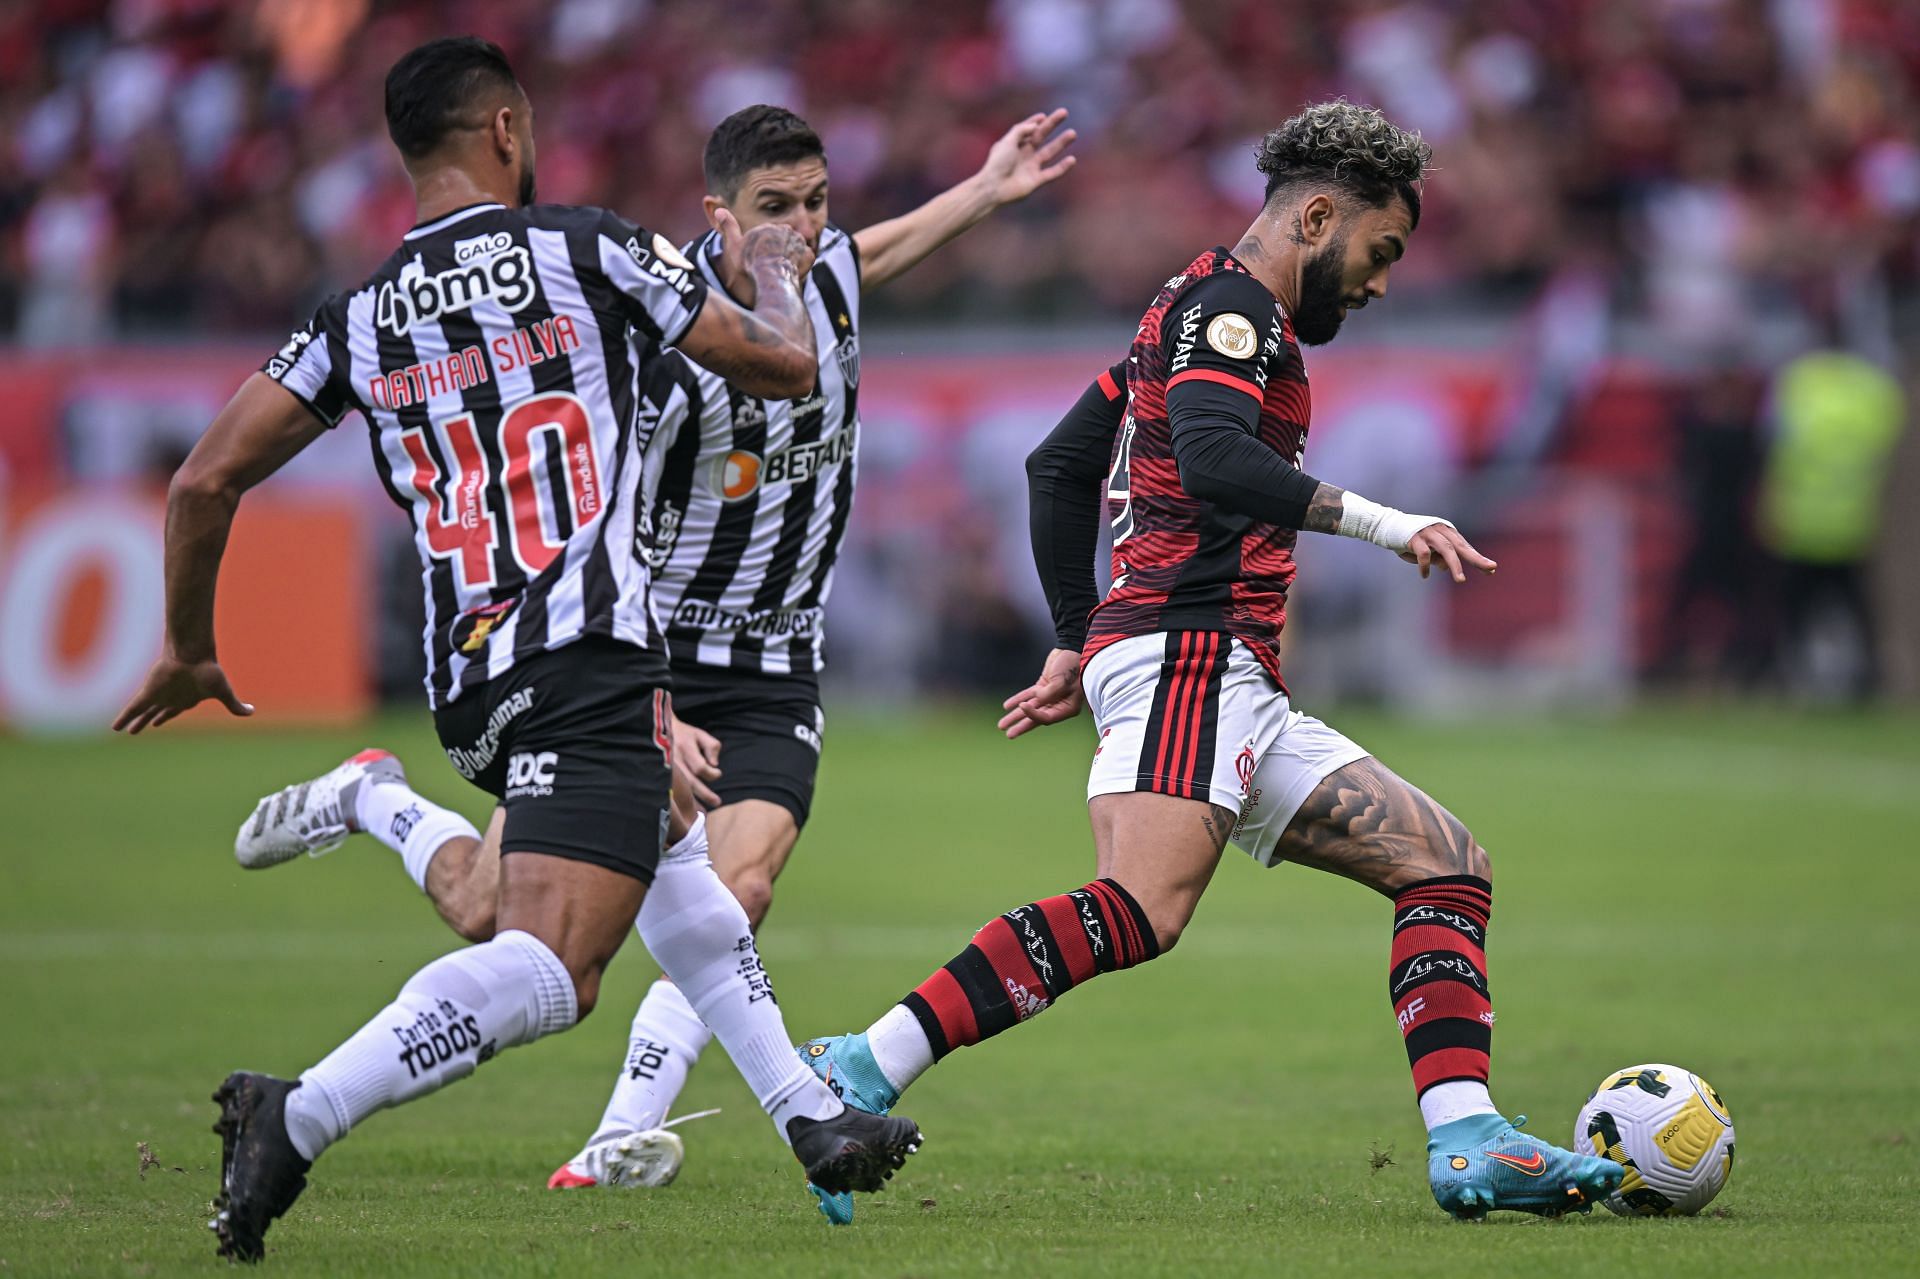 Atletico Mineiro and Flamengo will square off in the Copa do Brasil on Wednesday.